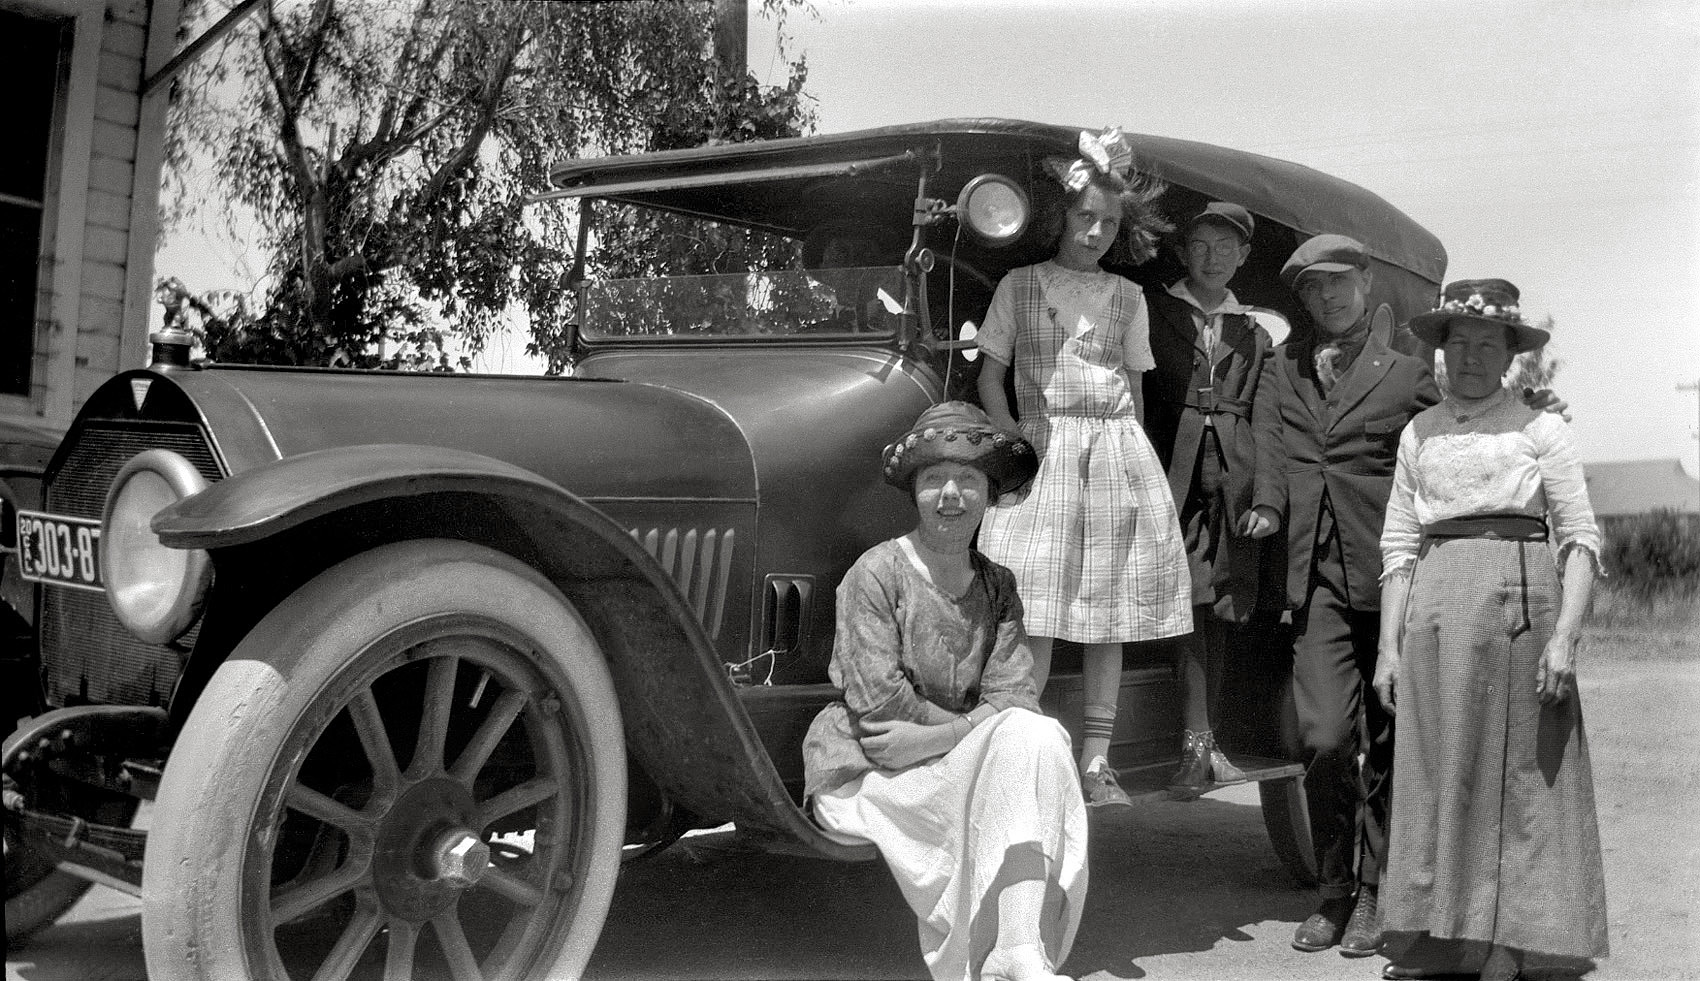 Members of my mother's family in Merced Falls, California, on an excursion from their home in San Francisco. Their family car is a 1914 Hudson 6-54. Standing on the running board, my mother and her twin brother Albert, with her older brother Francis and mother Marie standing at the right. Her father John is in the car, barely visible behind the windshield; oldest brother Jack drove, but isn't in this shot. Anna, a family friend, is seated on the running board. They're visiting my mother's older sister Mary, who had recently wed and moved to Merced Falls. View full size.

Family archives date this trip in the summer of 1919, although there's a 1920 license plate; I'm not sure how they were issued back then.

Some of these folks are also seen in a 1916 family portrait.

Scanned from original 2-1/2 X 4-1/4 116 roll film negative.